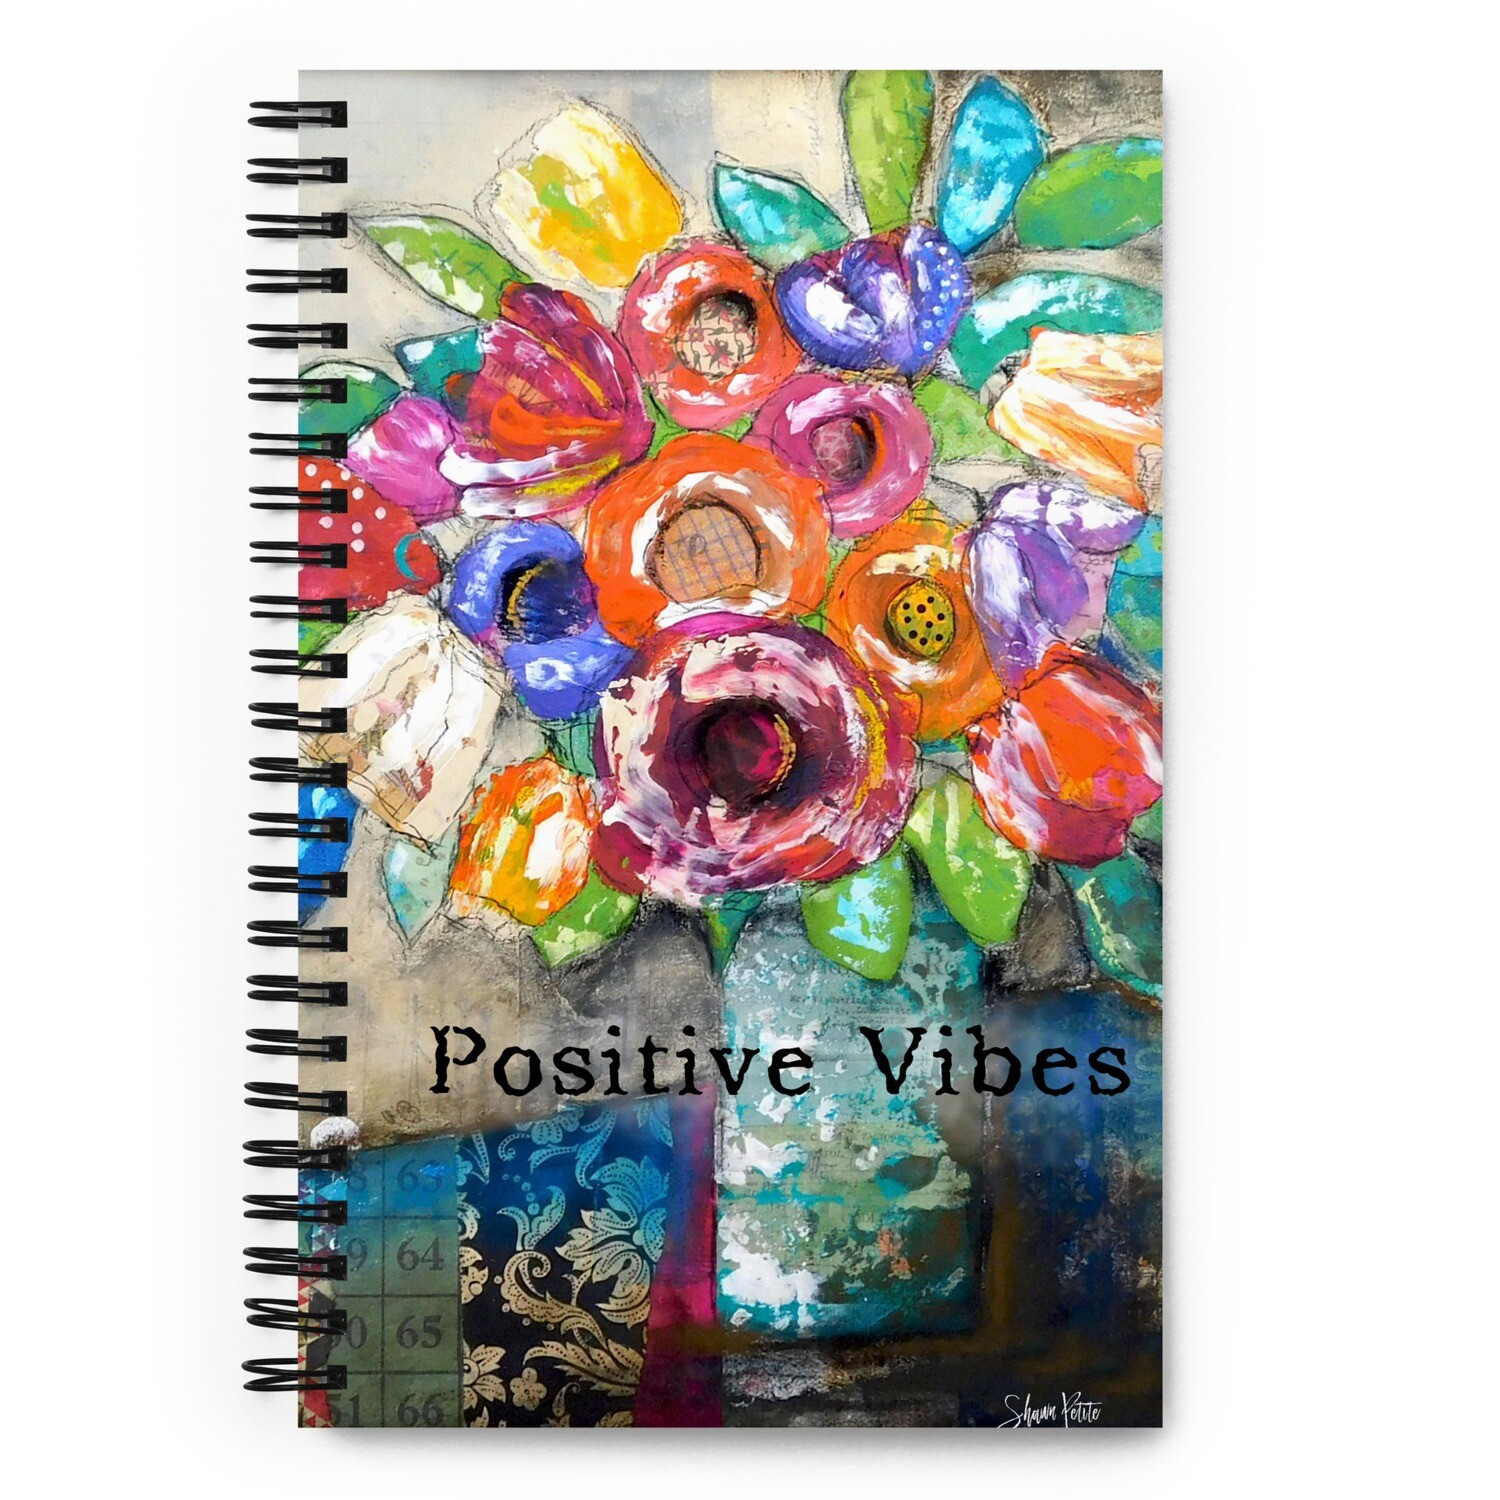 Positive Vibes Spiral notebook with dotted pages